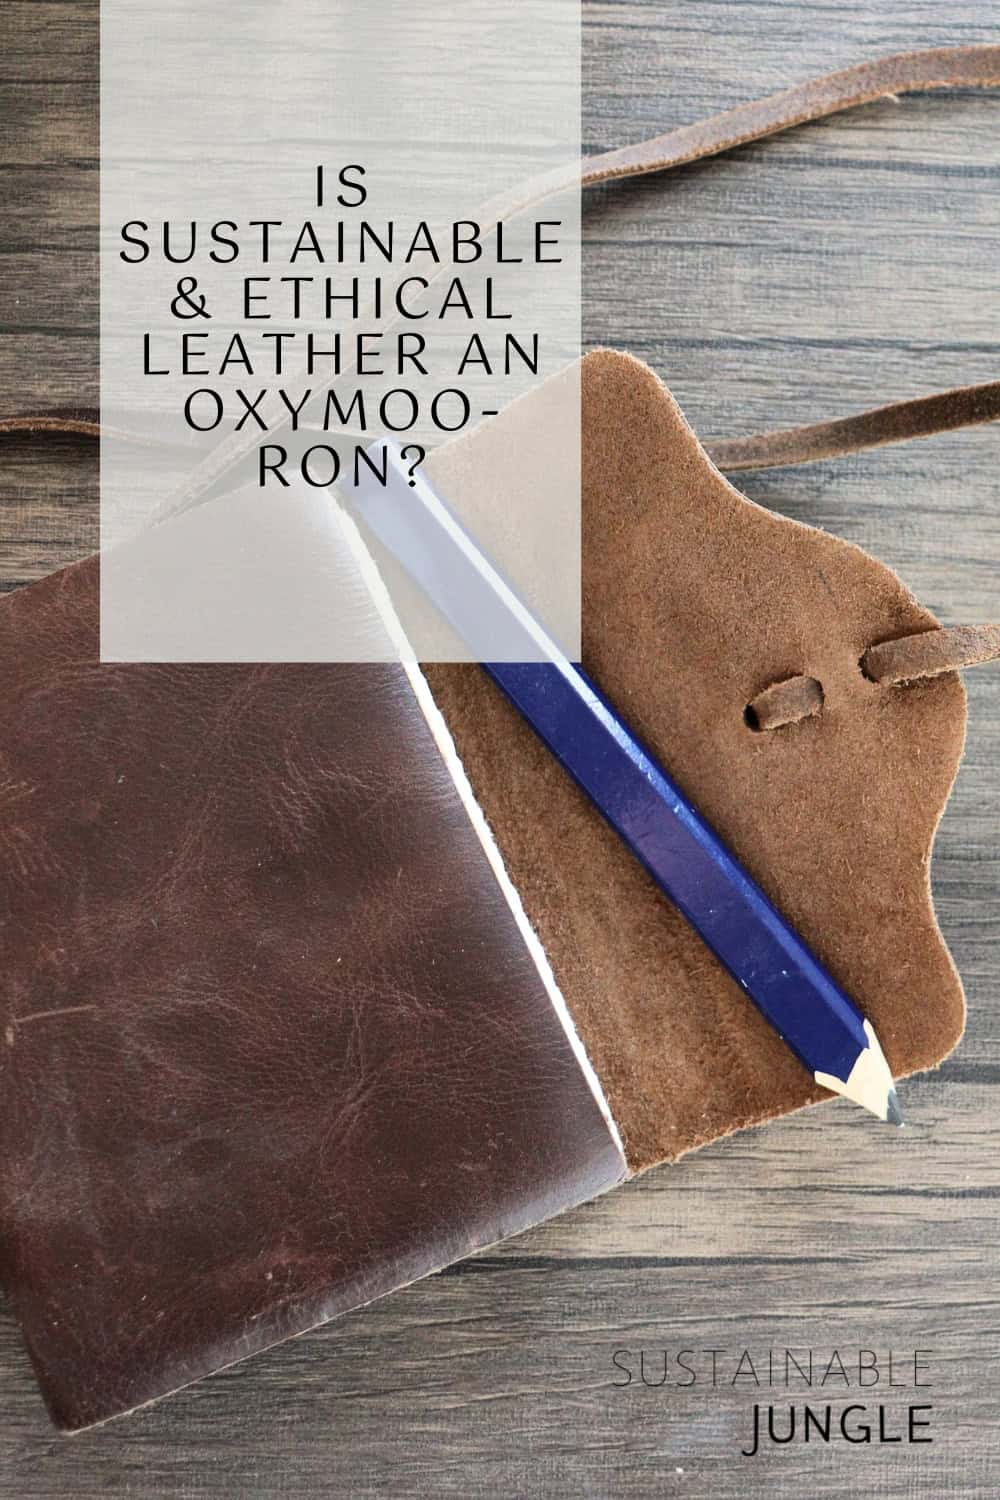 Is Sustainable & Ethical Leather An Oxymoo-ron? Image by Sustainable Jungle #ethicalleather #isleatherethical #sustainableleather #leathersustainability #ethicallysourcedleather #sustainablejungle